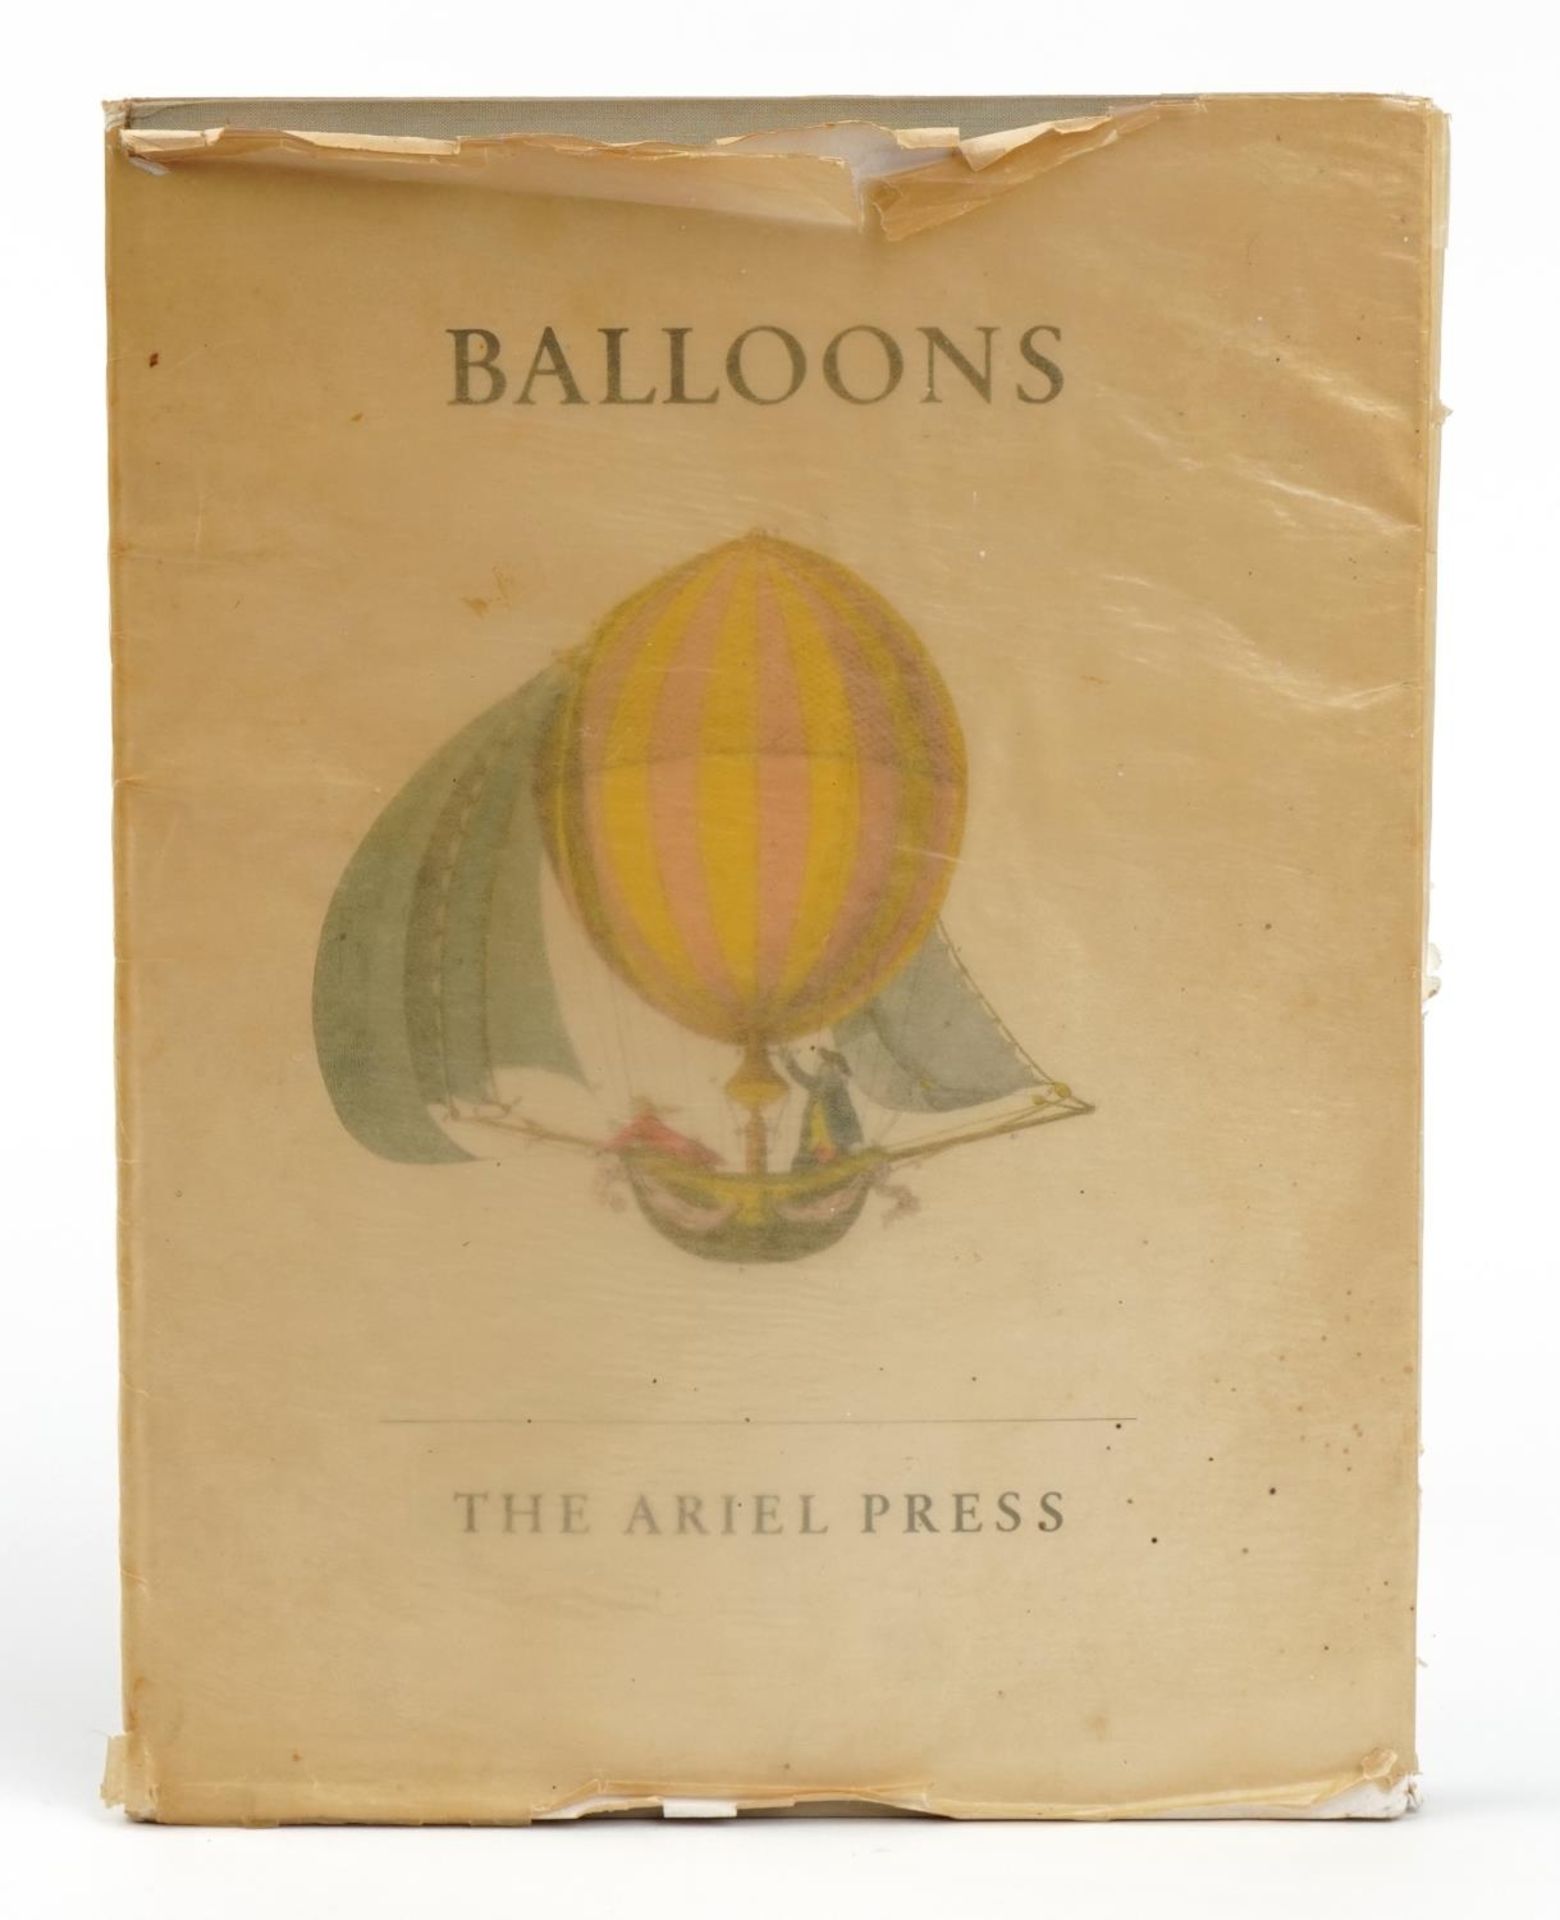 Balloons, hardback book by C H Gibbs-Smith, published by the Ariel Press London : For further